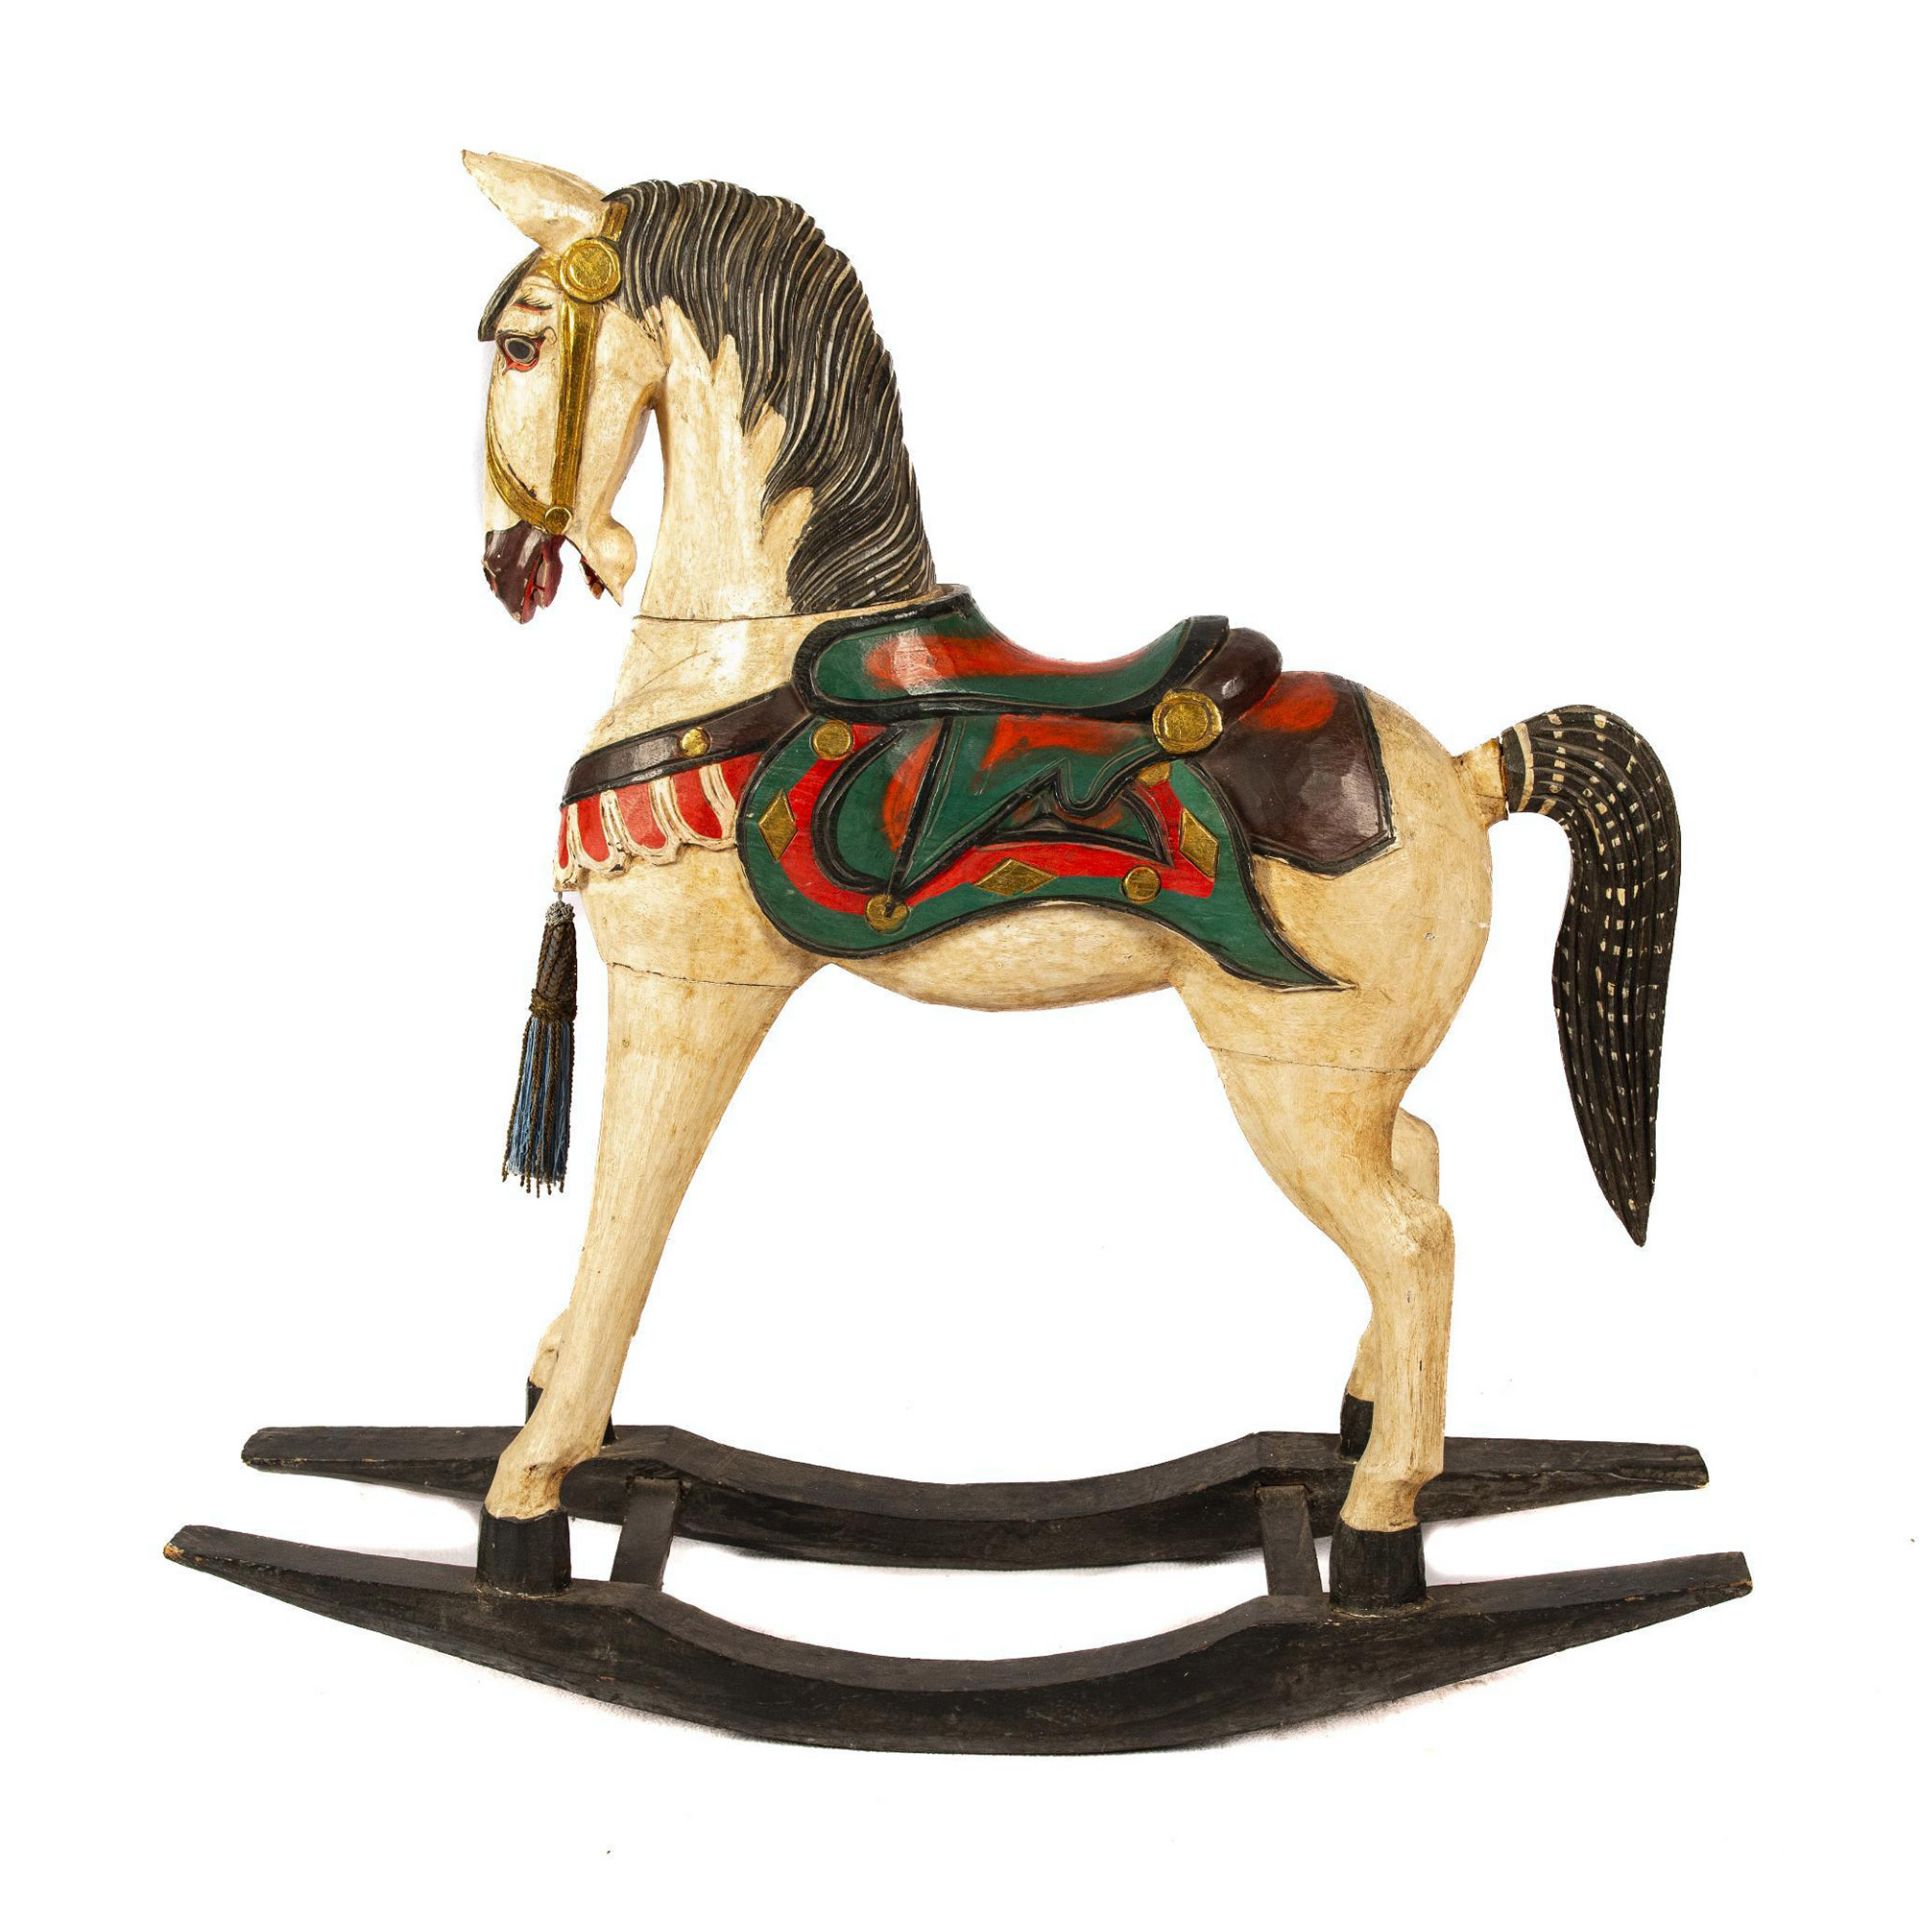 Tall Painted Wood Rocking Horse Decoration - Image 2 of 5